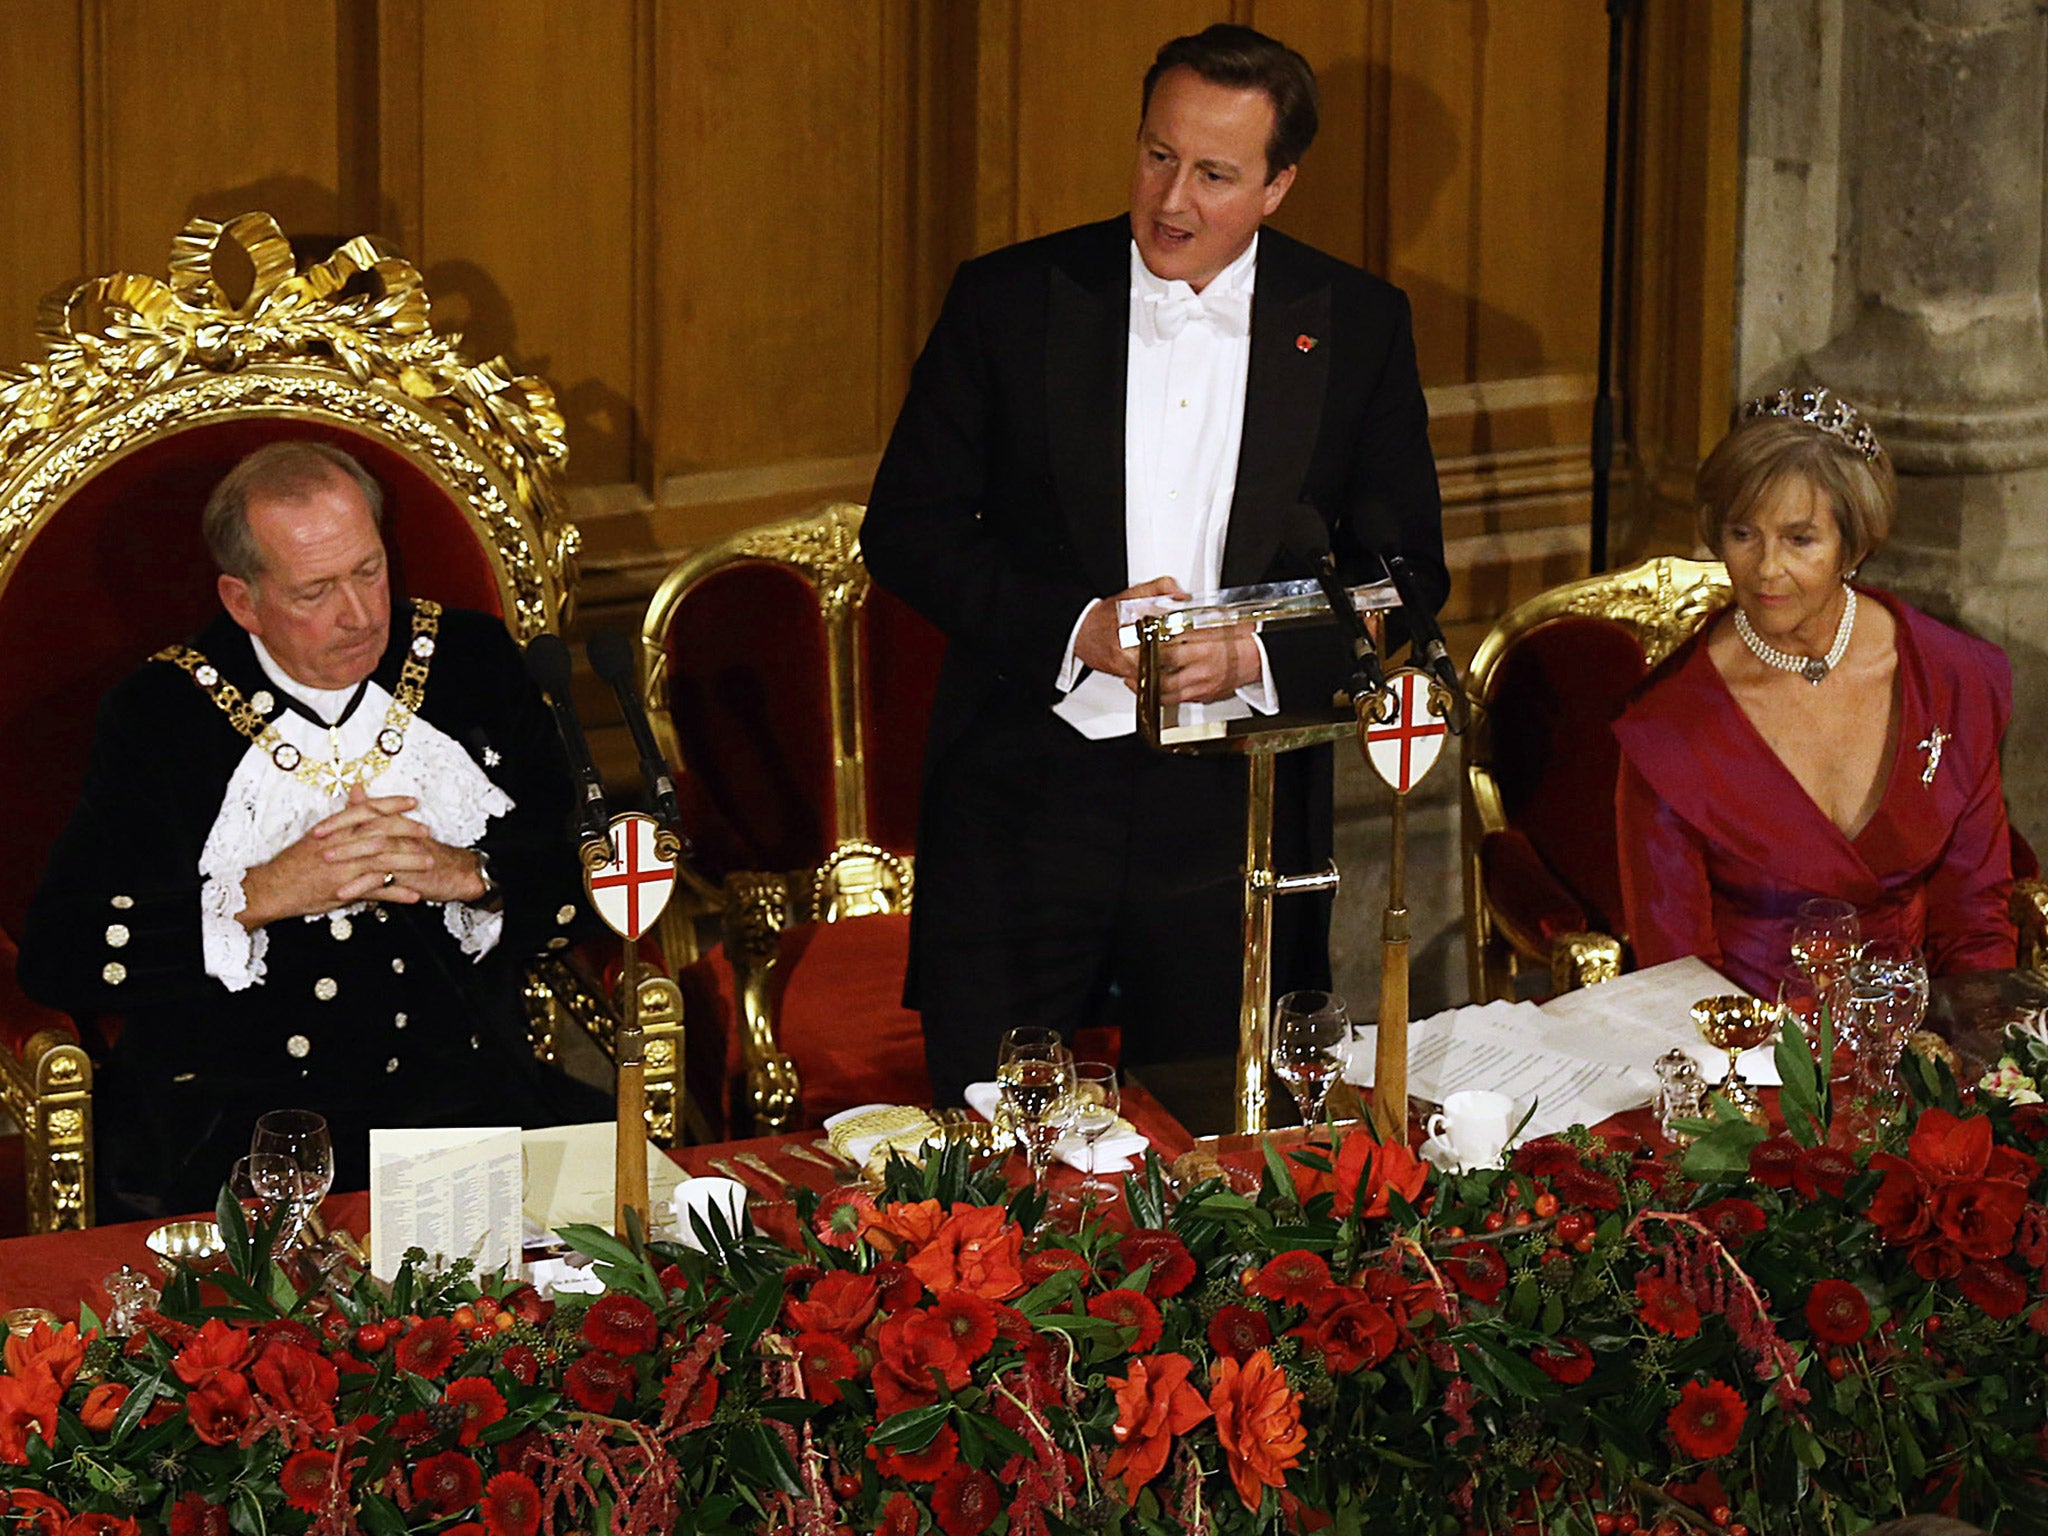 Prime Minister David Cameron makes a speech during the the Lord Mayor's Banquet at The Guildhall last November